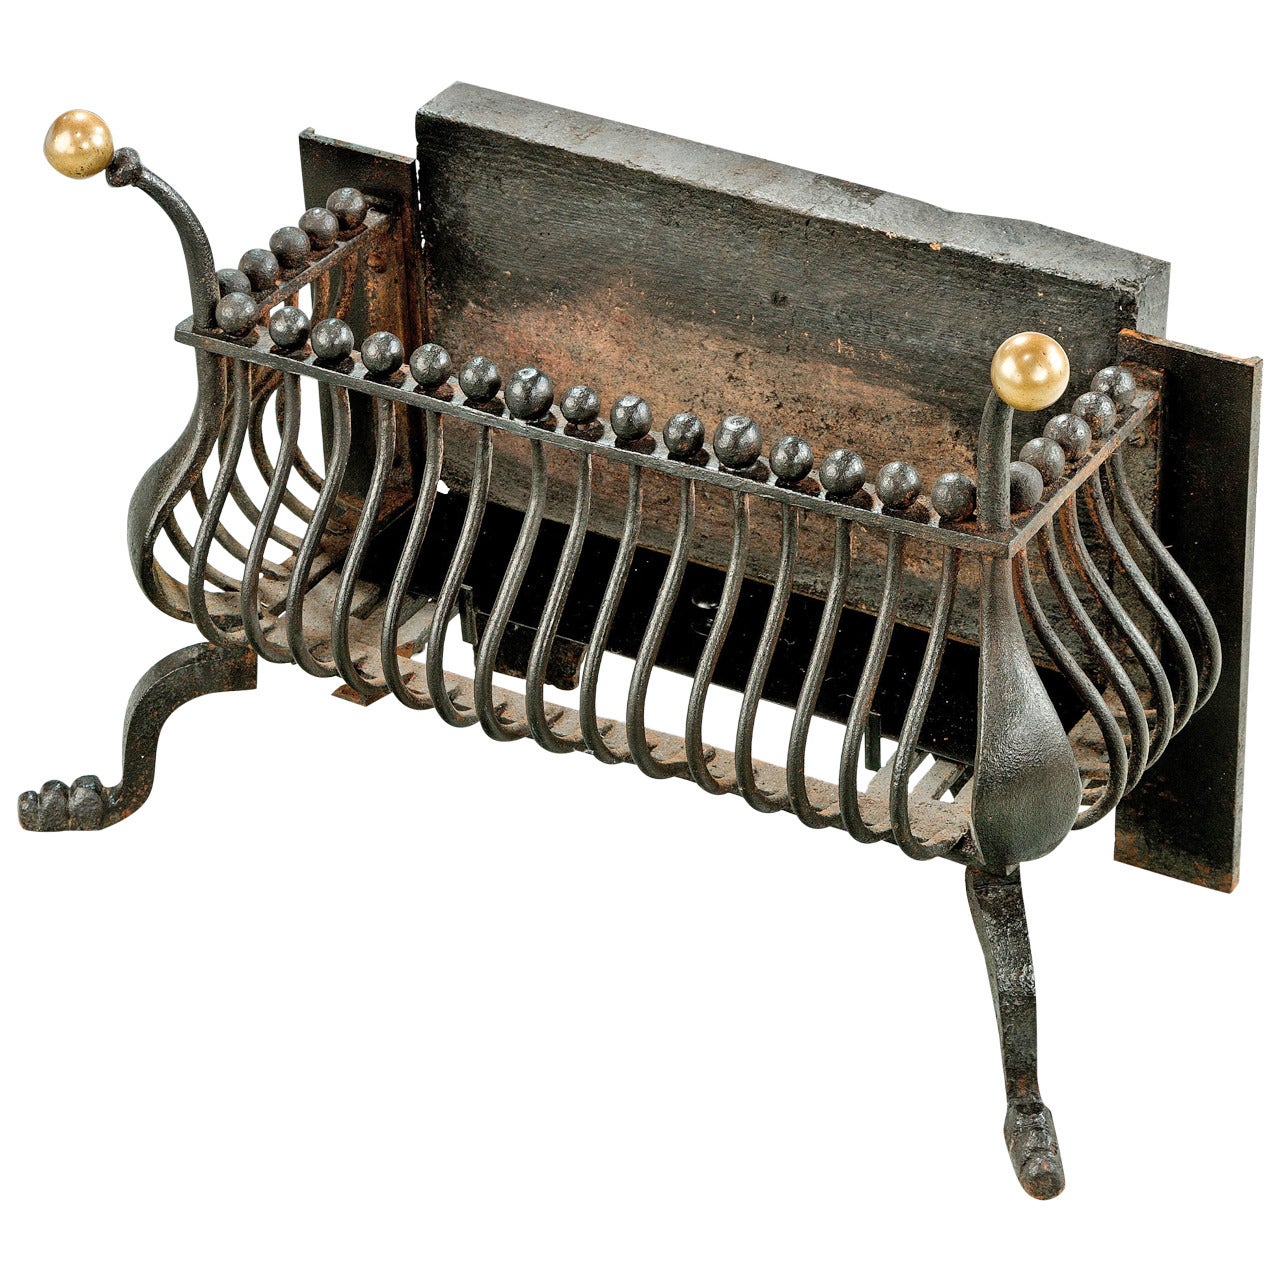 Late Regency Period Steel and Brass Grate